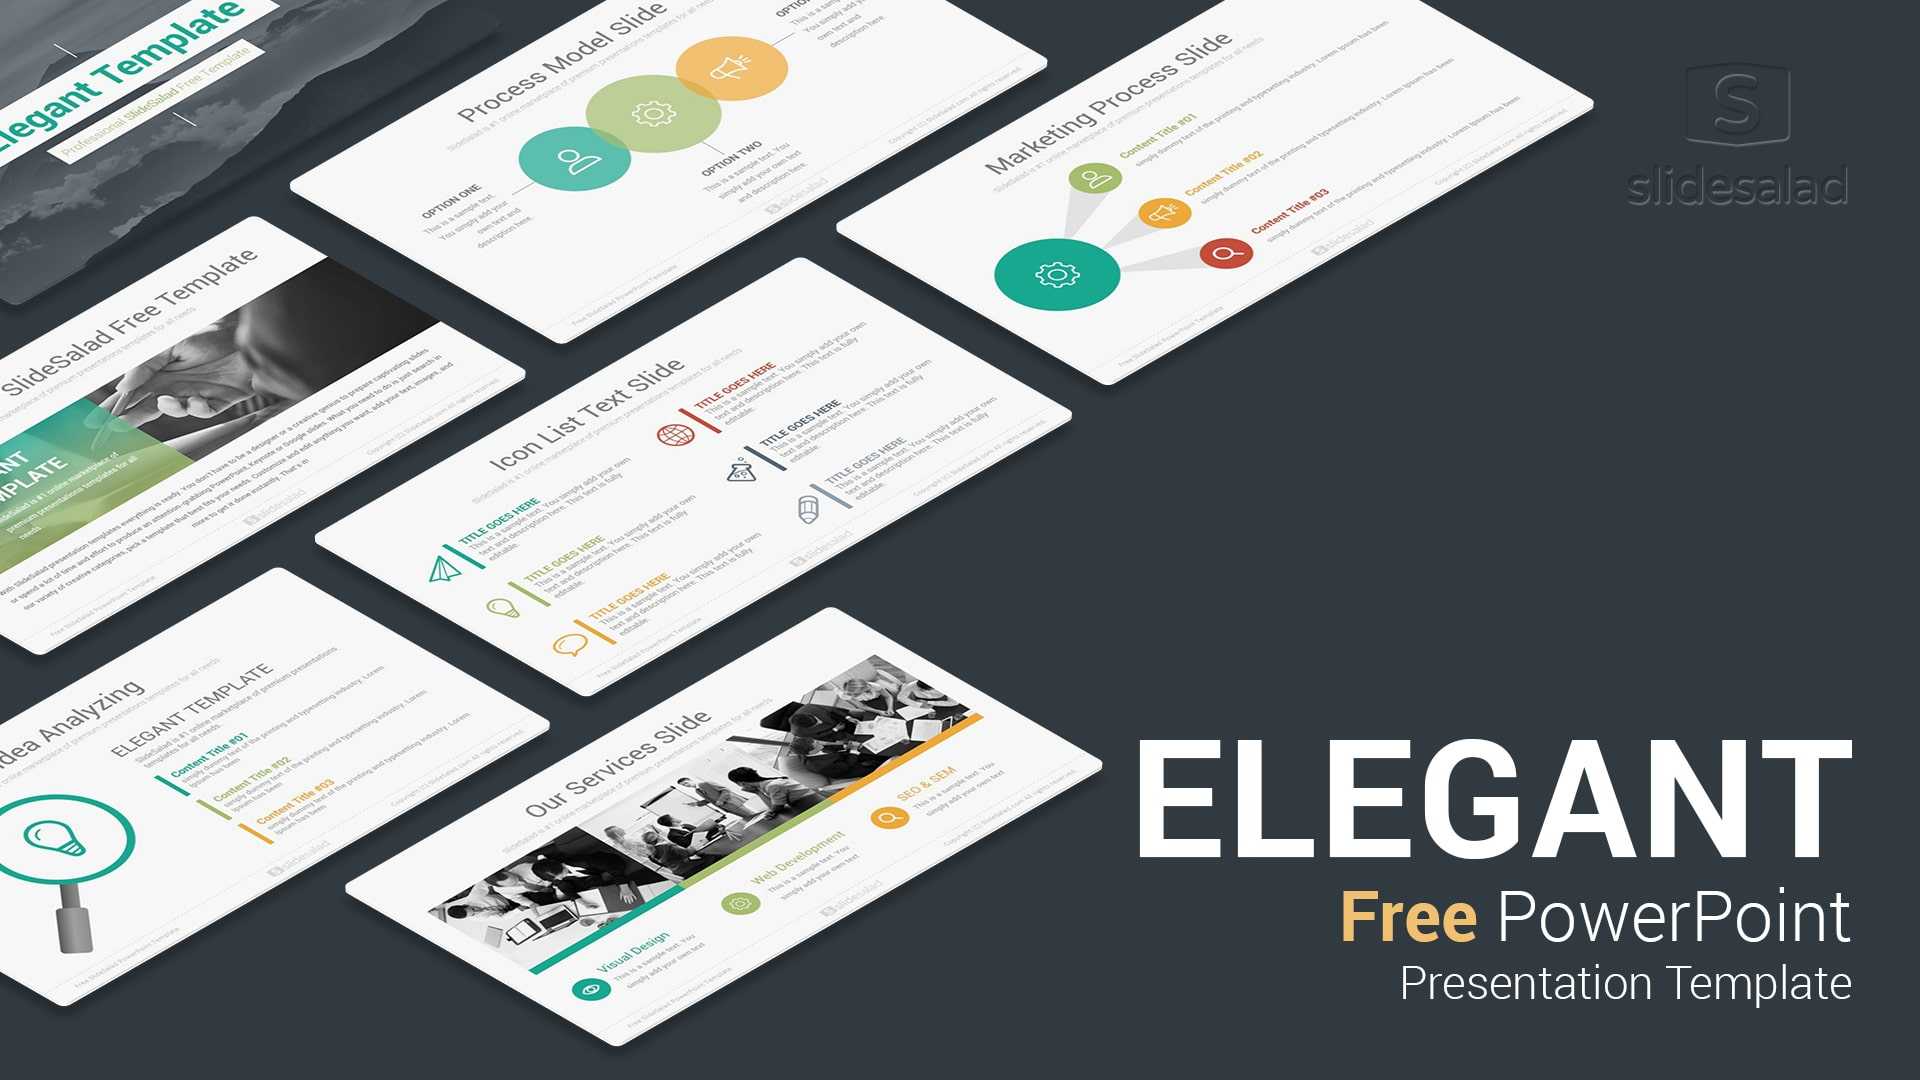 Elegant Free Download Powerpoint Templates For Presentation With Free Download Powerpoint Templates For Business Presentation